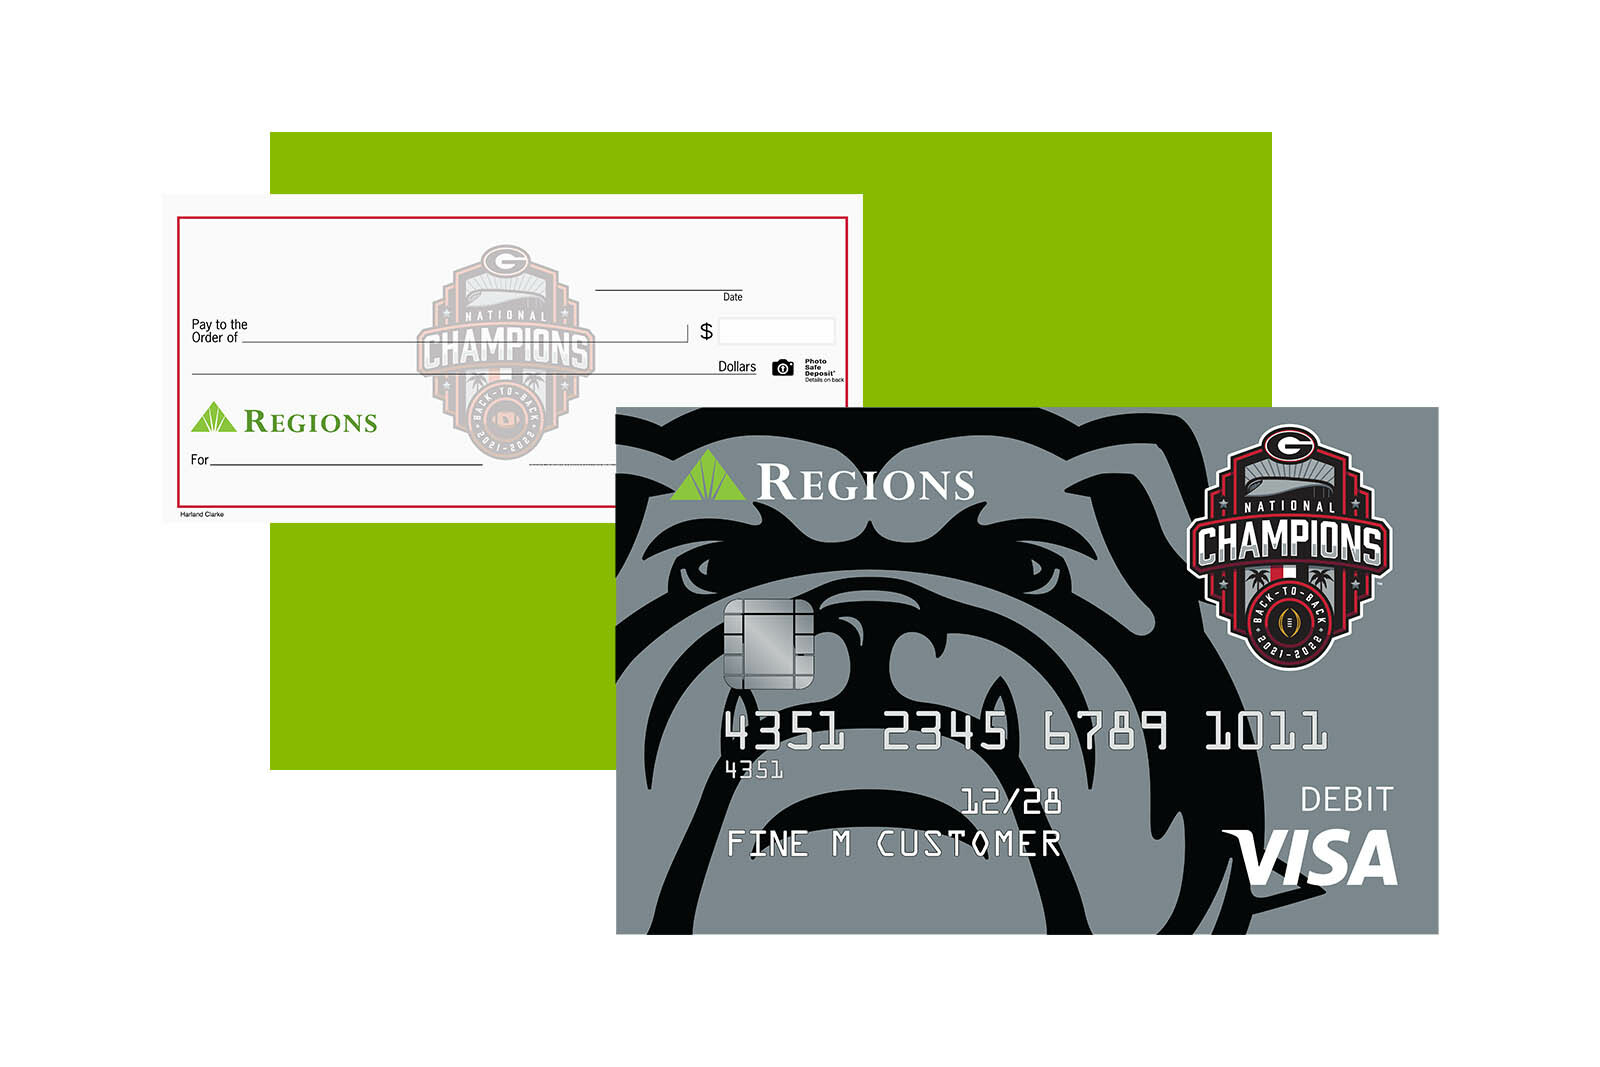 Regions Bank Georgia National Champions debit card and check